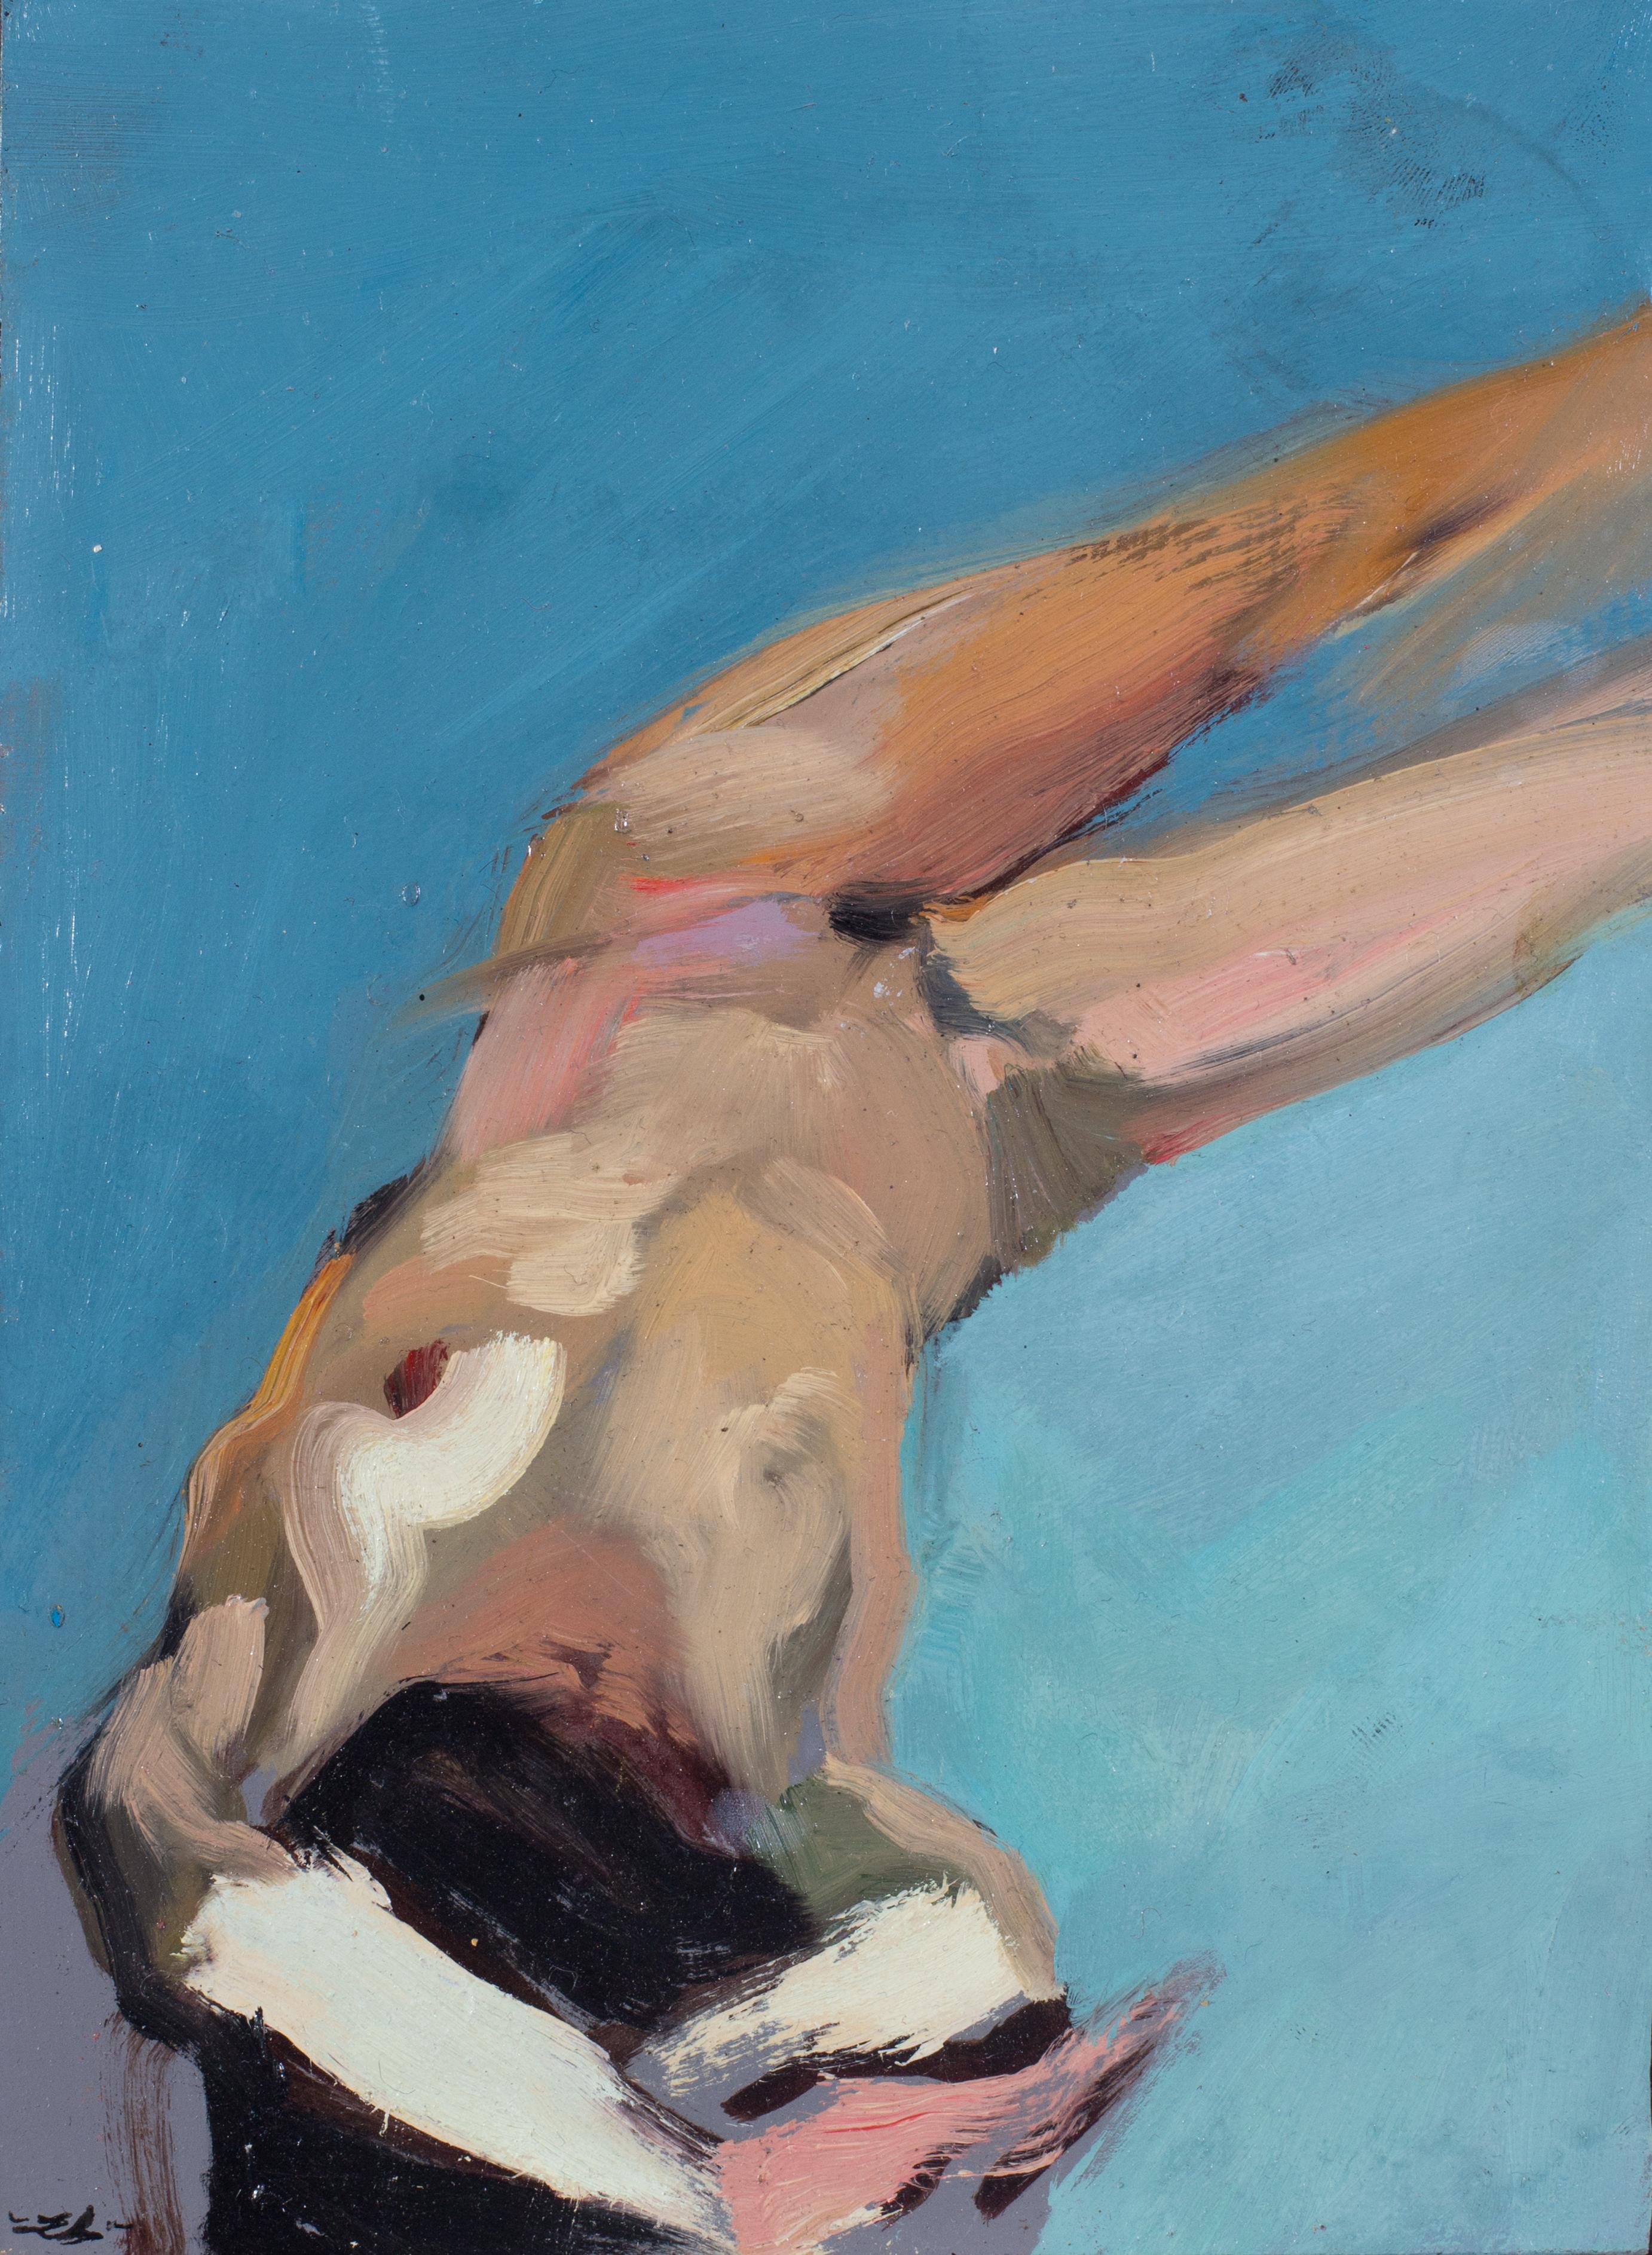 This small female nude study by Lamb is painted on block and shows the figure from above, her left arm resting behind her head and her body curving around to the right. Lamb captures the variant skin tones as the light picks up the left side of her